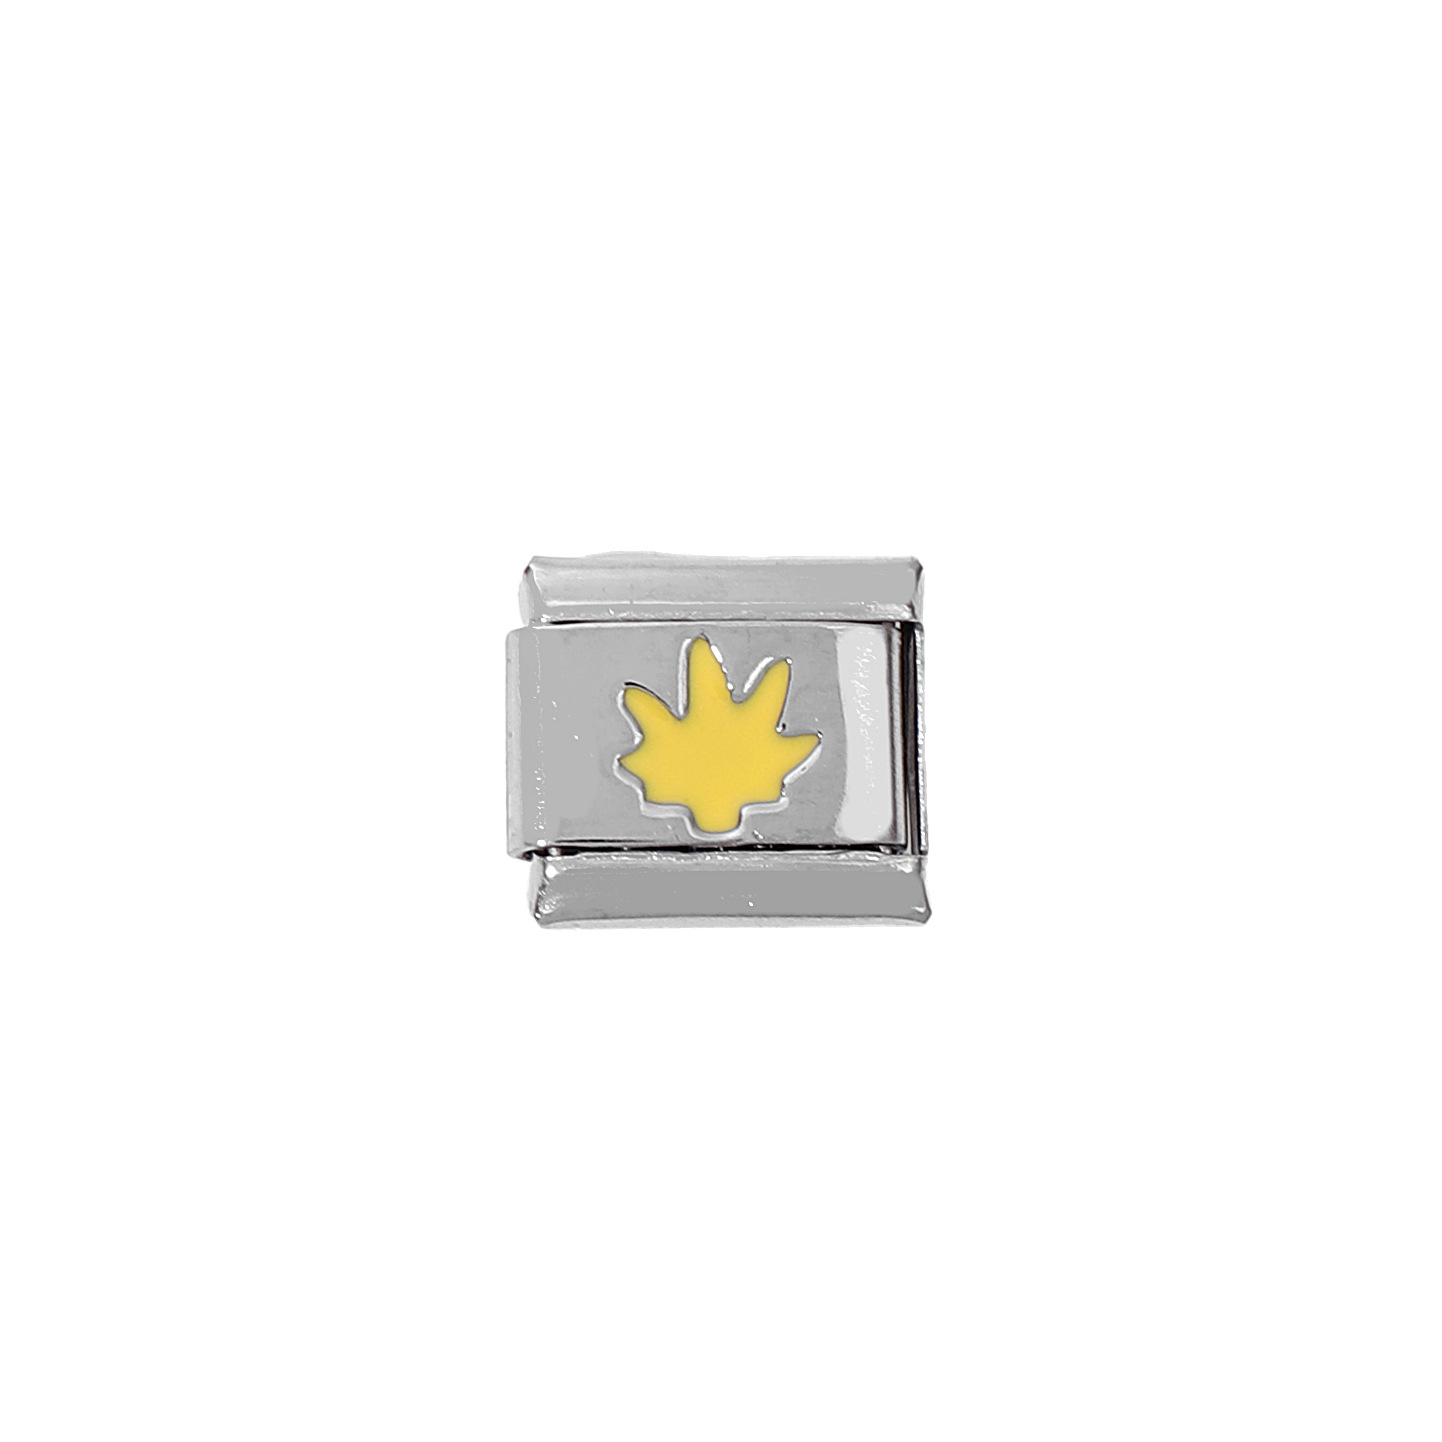 0278- Yellow Maple Leaf 1 section